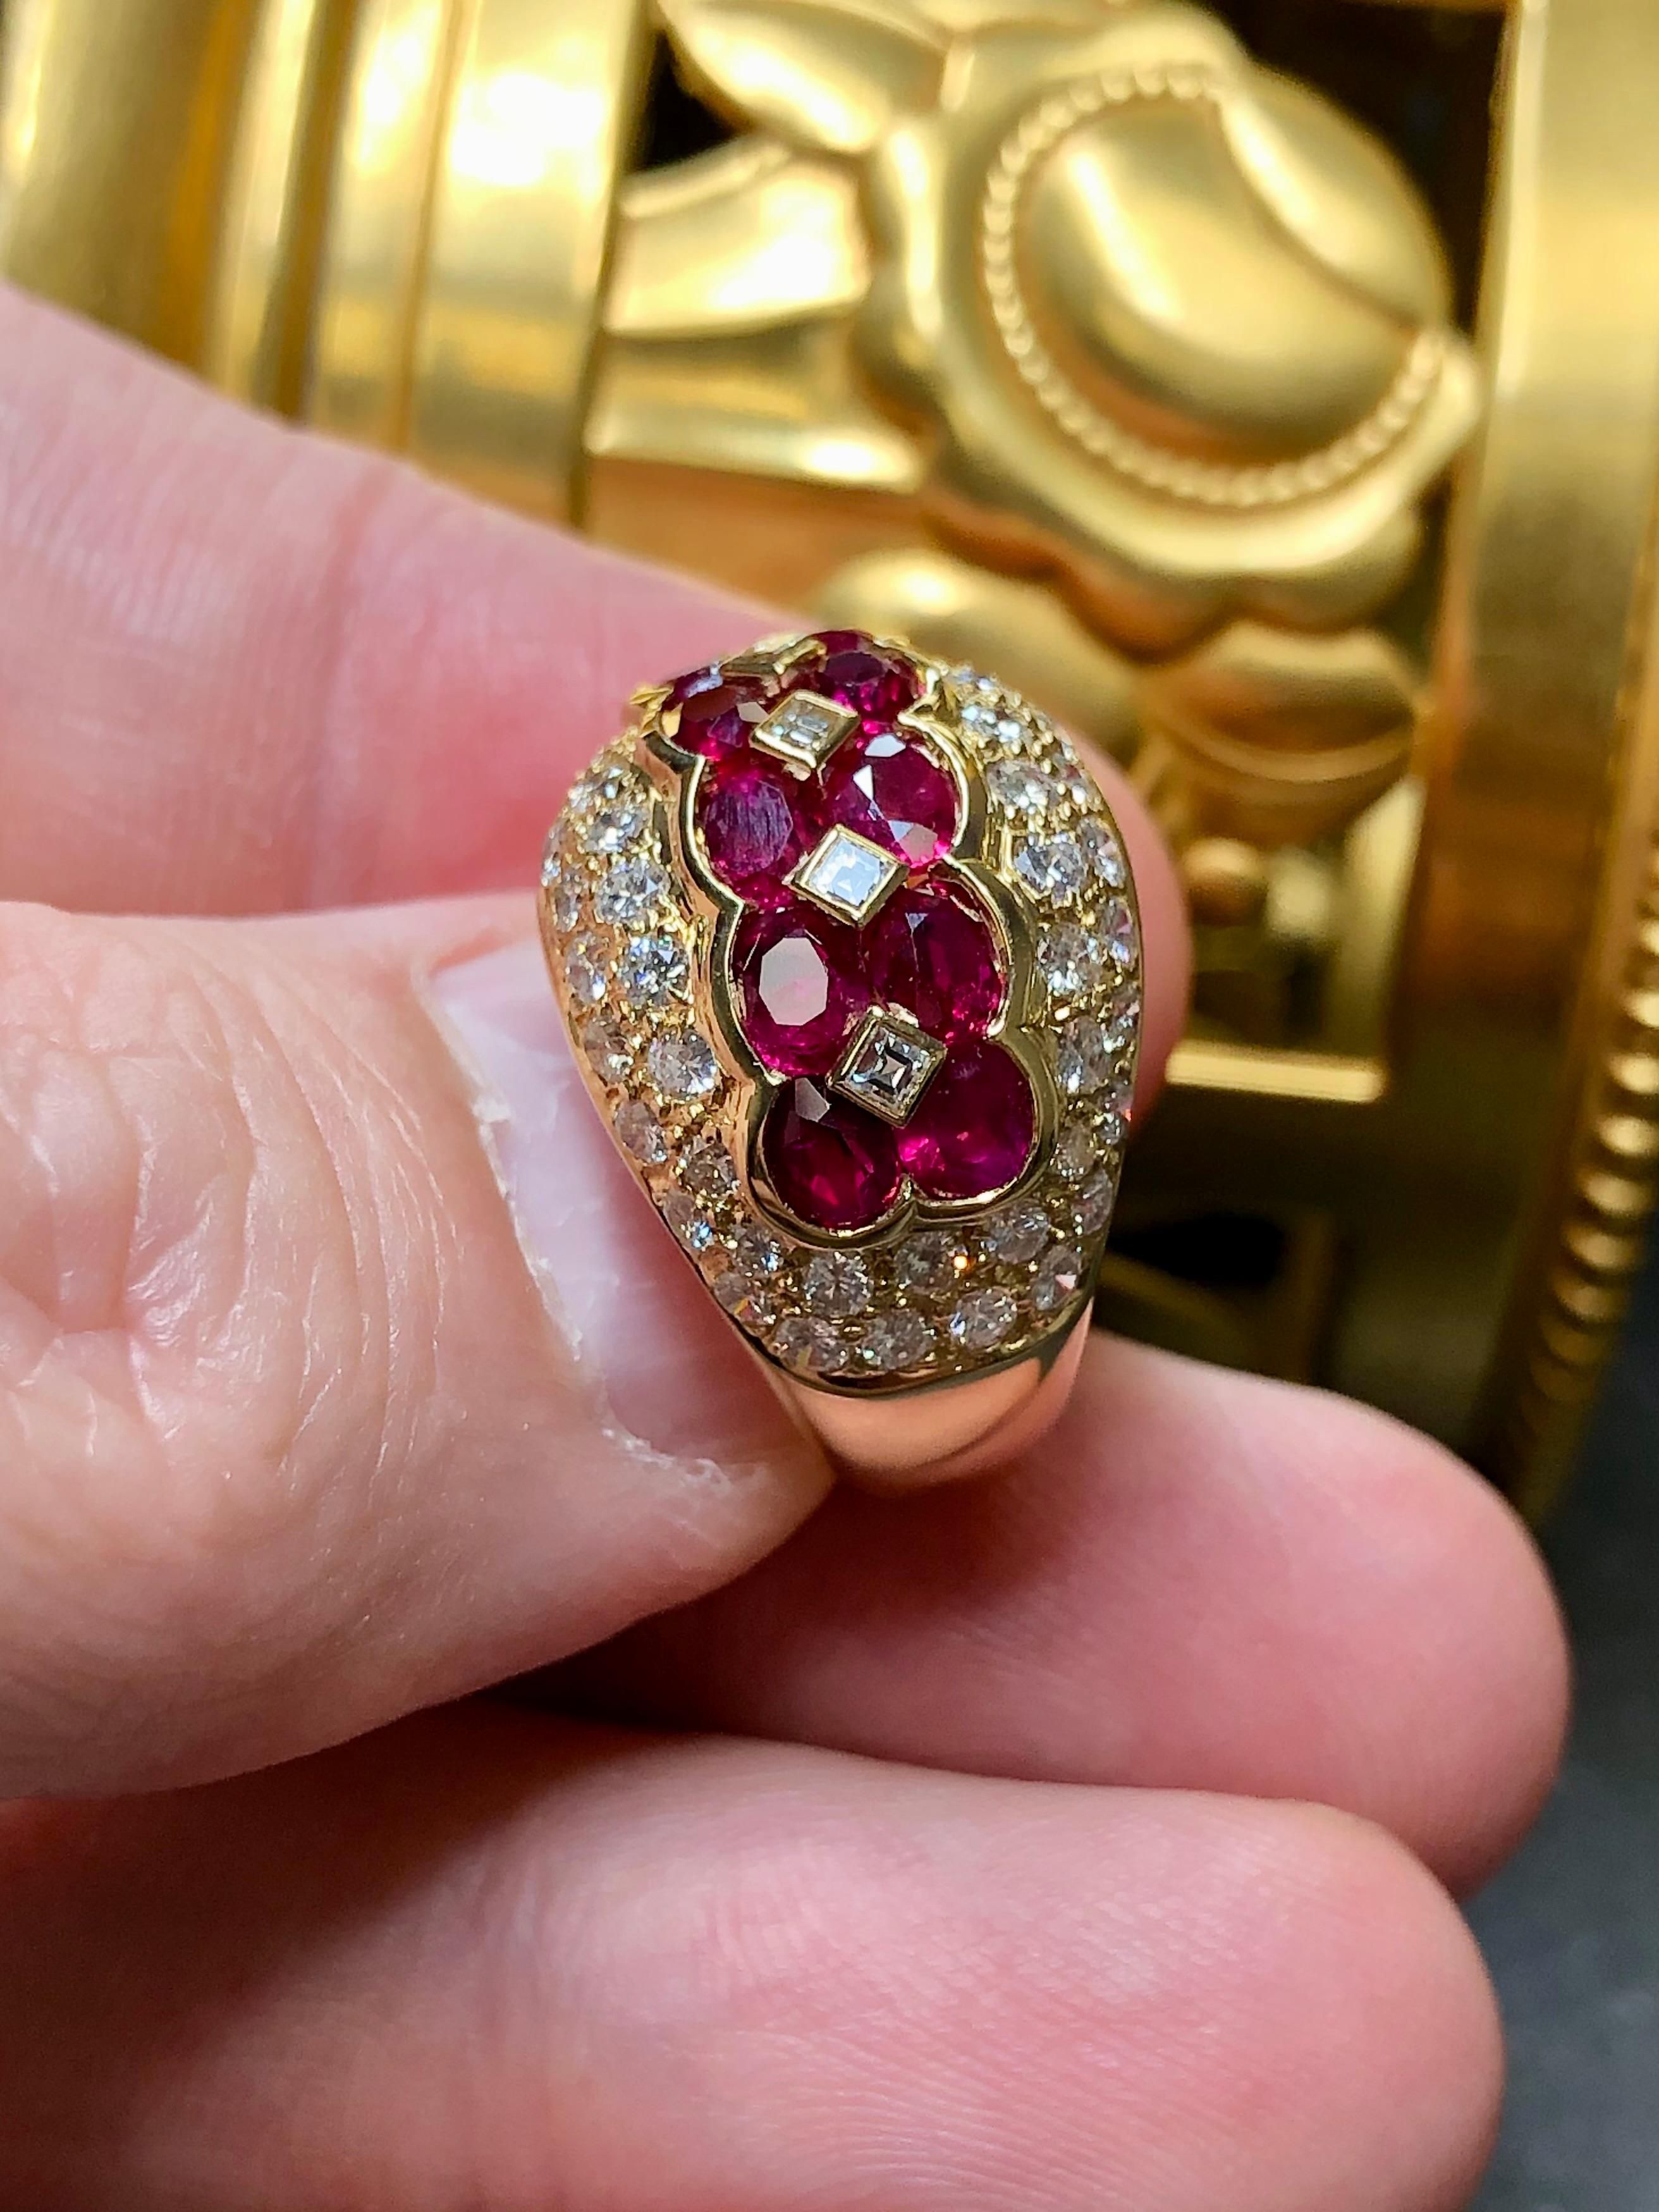 Estate 18K Yellow Gold Oval Ruby Pave Diamond Cocktail Ring 4.57cttw Sz 5.5 For Sale 2